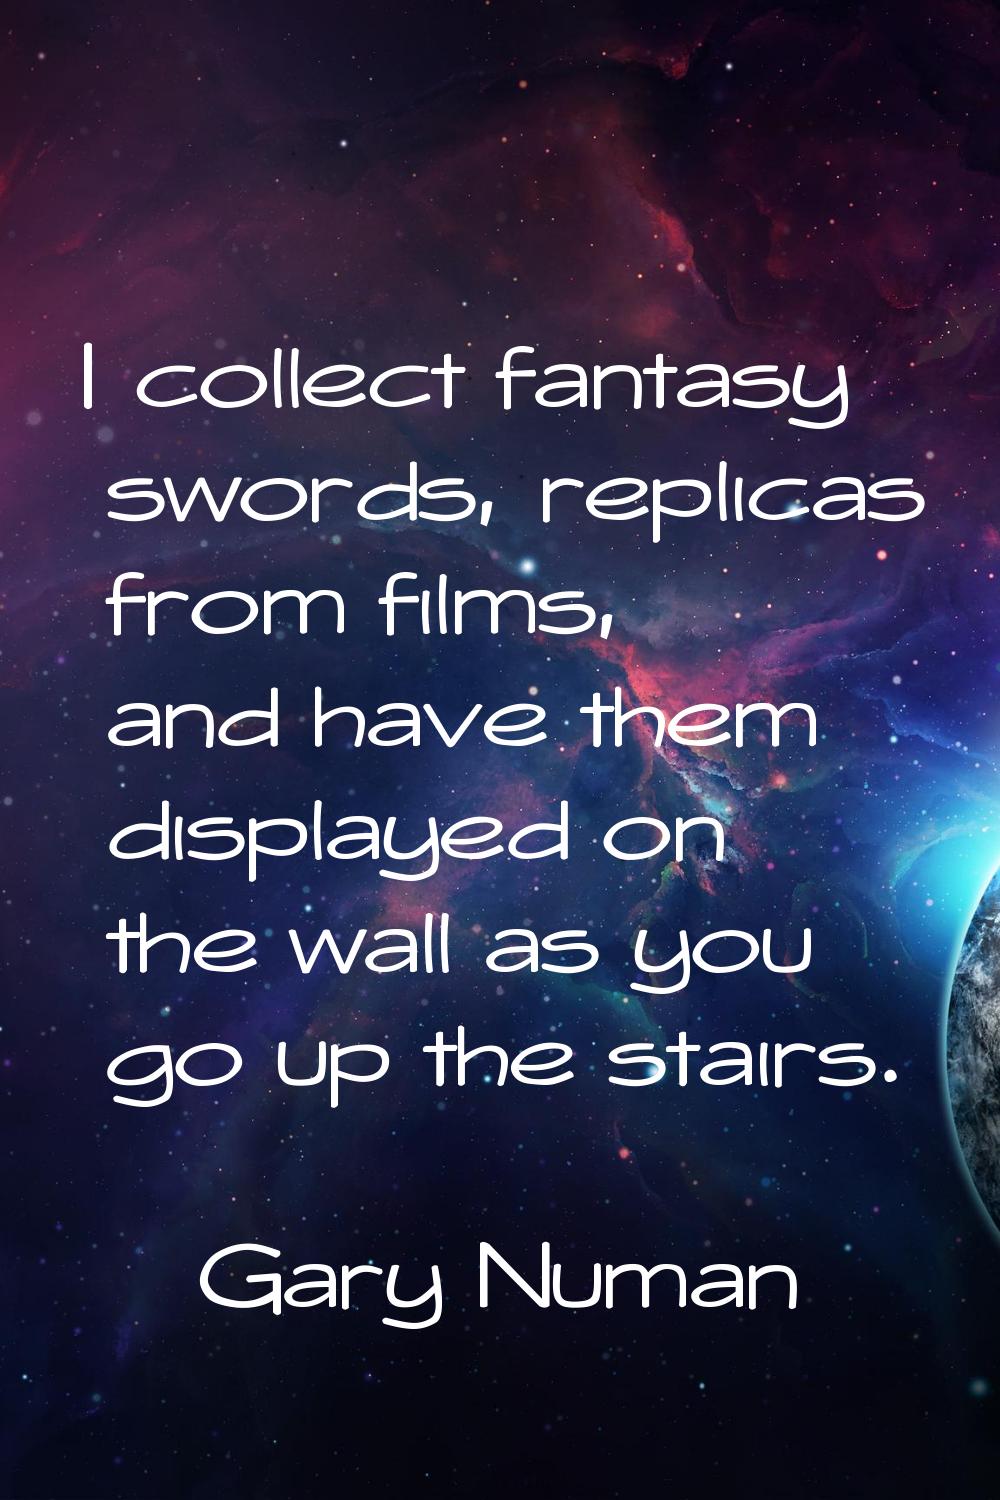 I collect fantasy swords, replicas from films, and have them displayed on the wall as you go up the